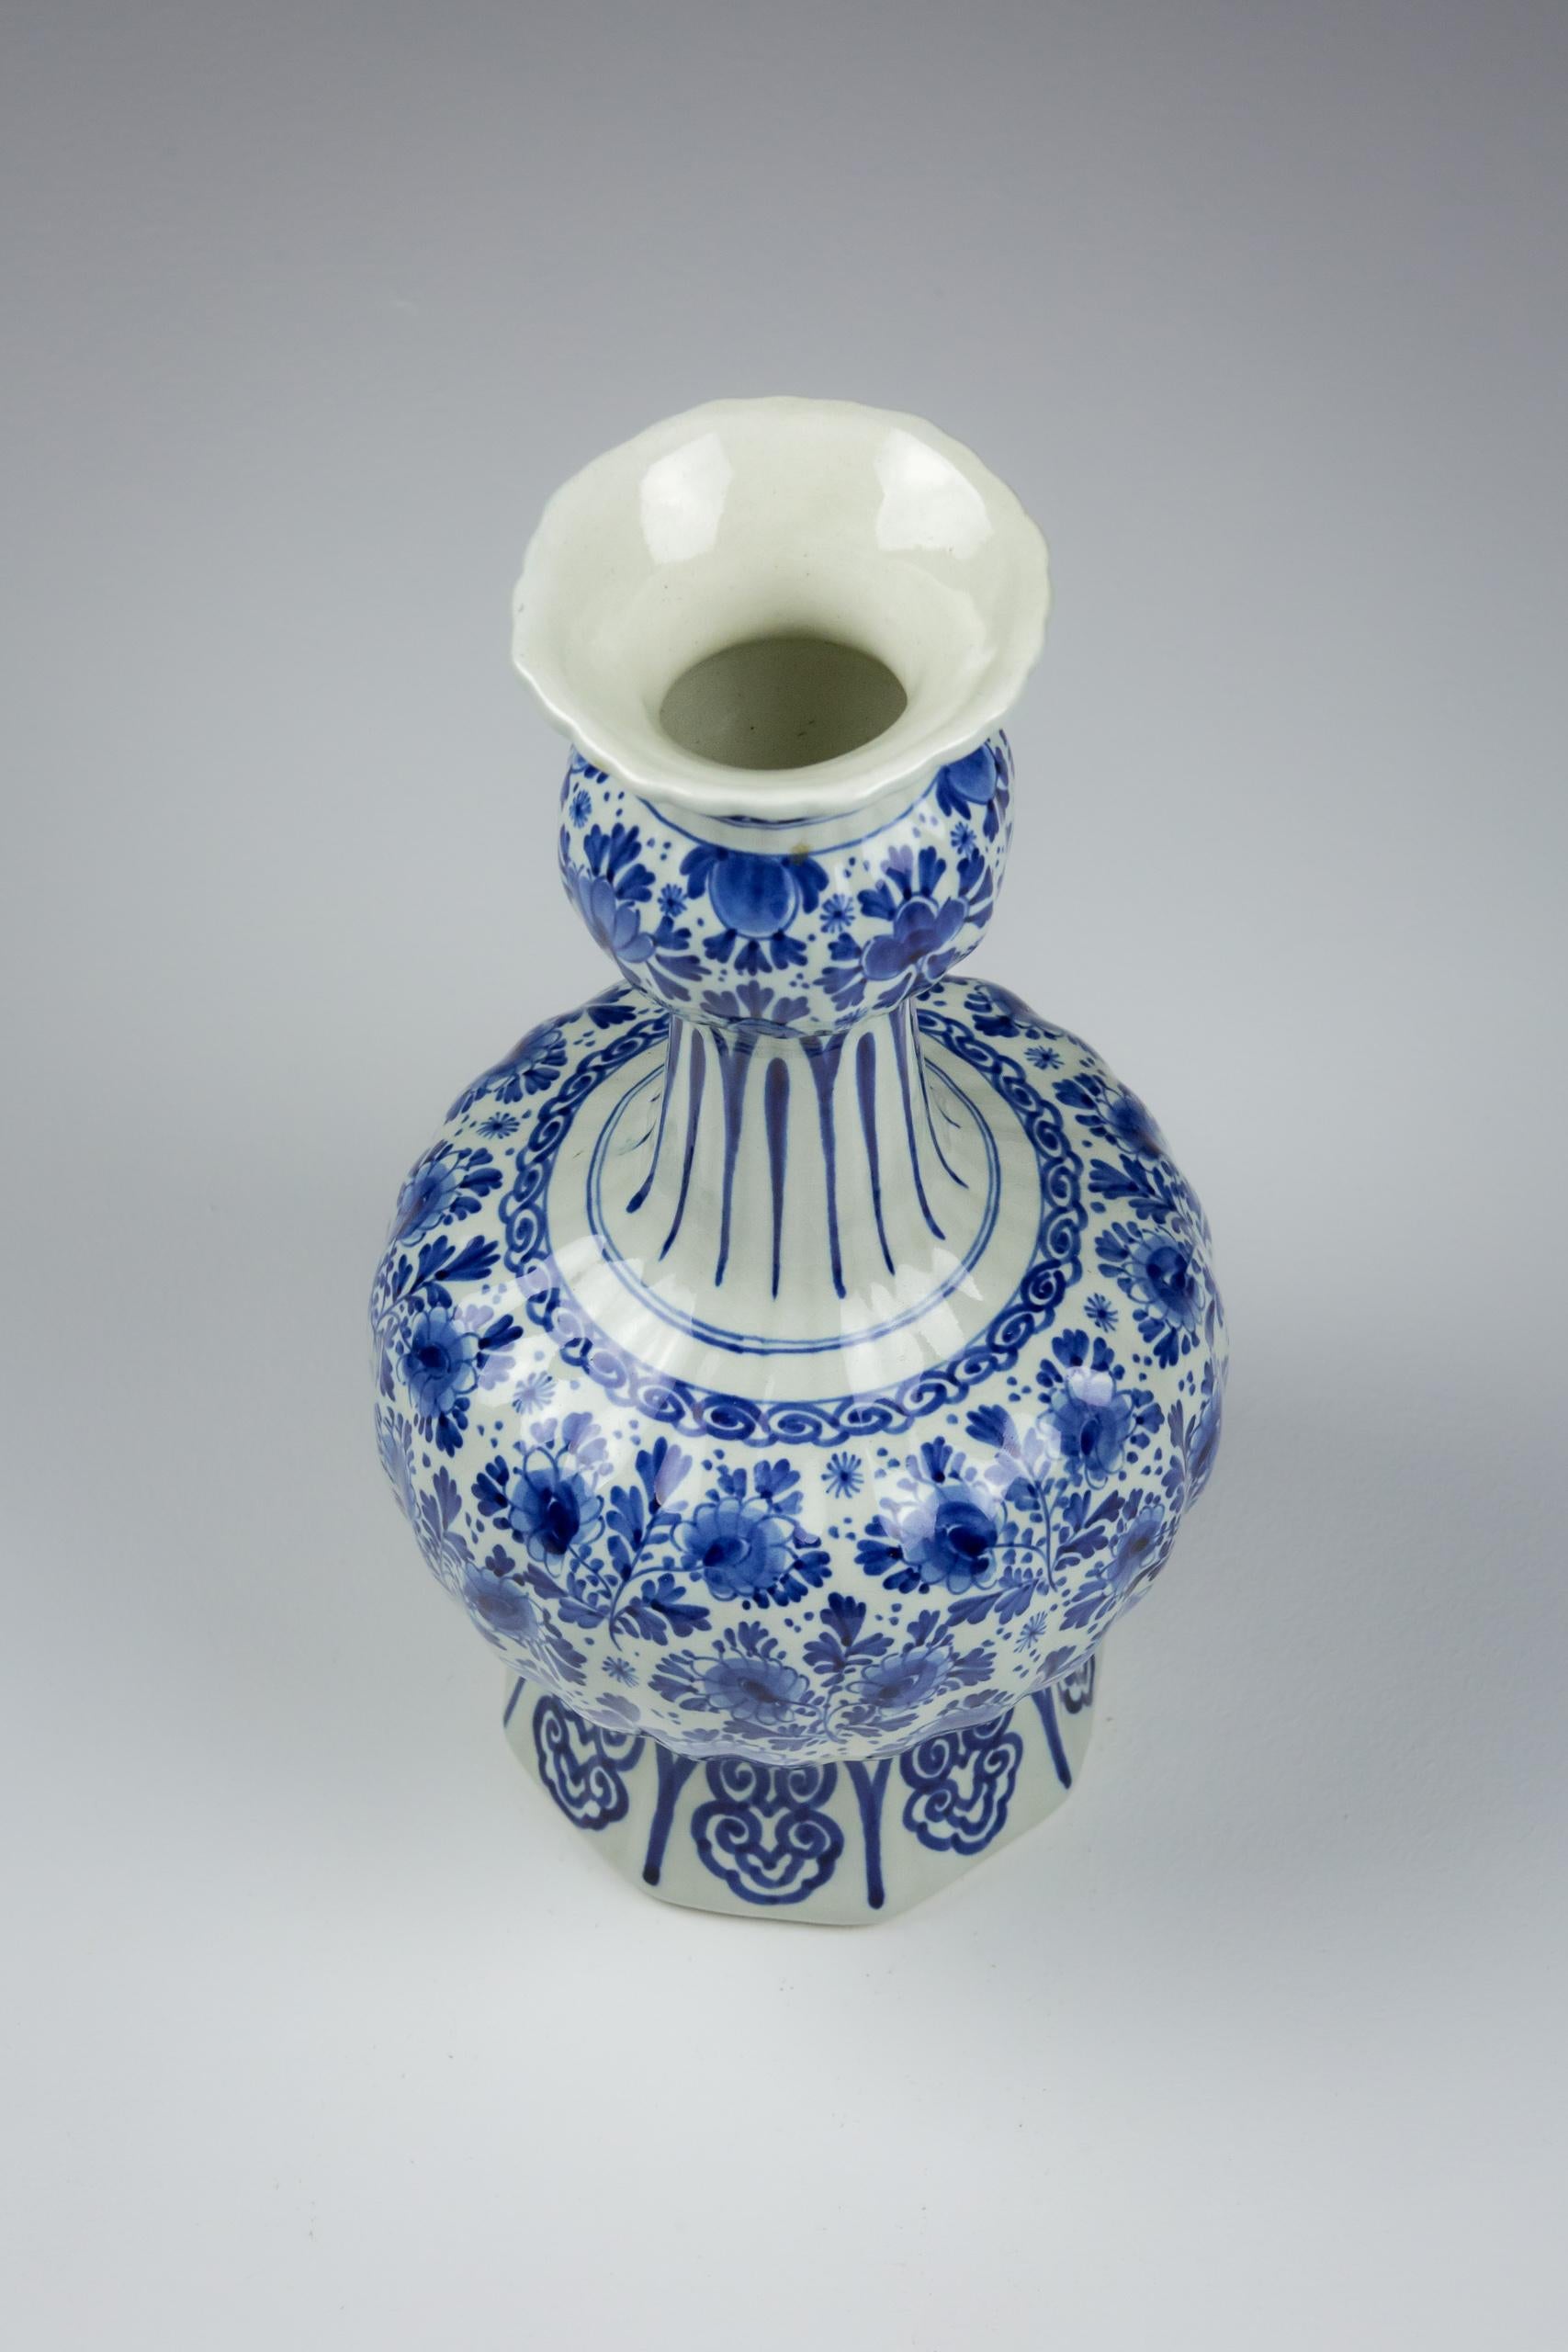 20th Century Blue and White Delft Knobbelvaas or Gourd Vase For Sale 1